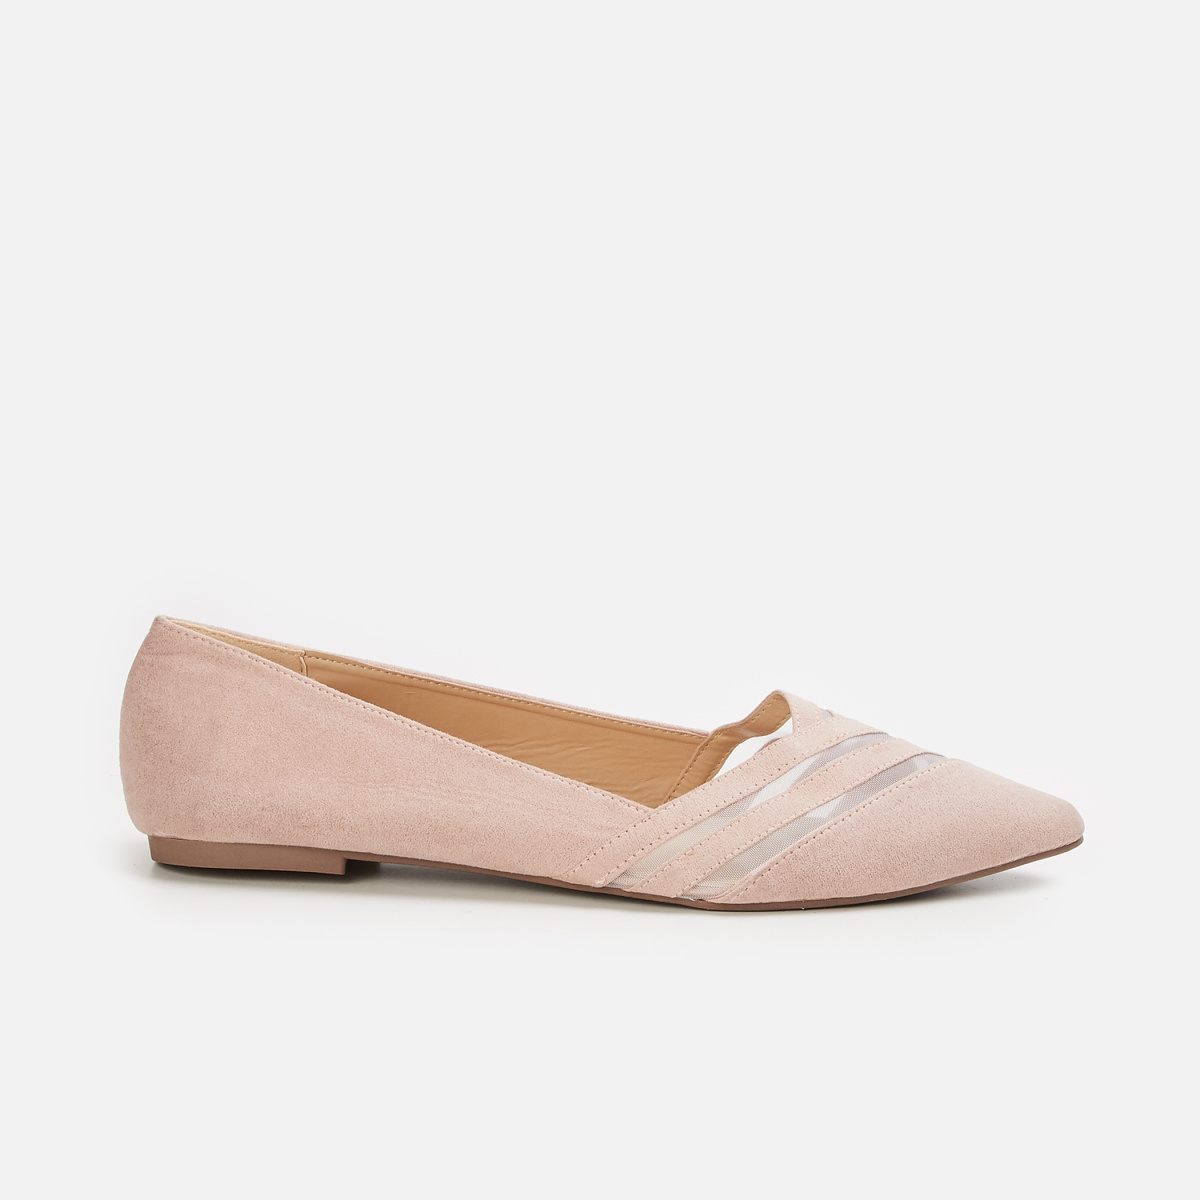 GINGER Women Solid Pointed Toe Ballerinas